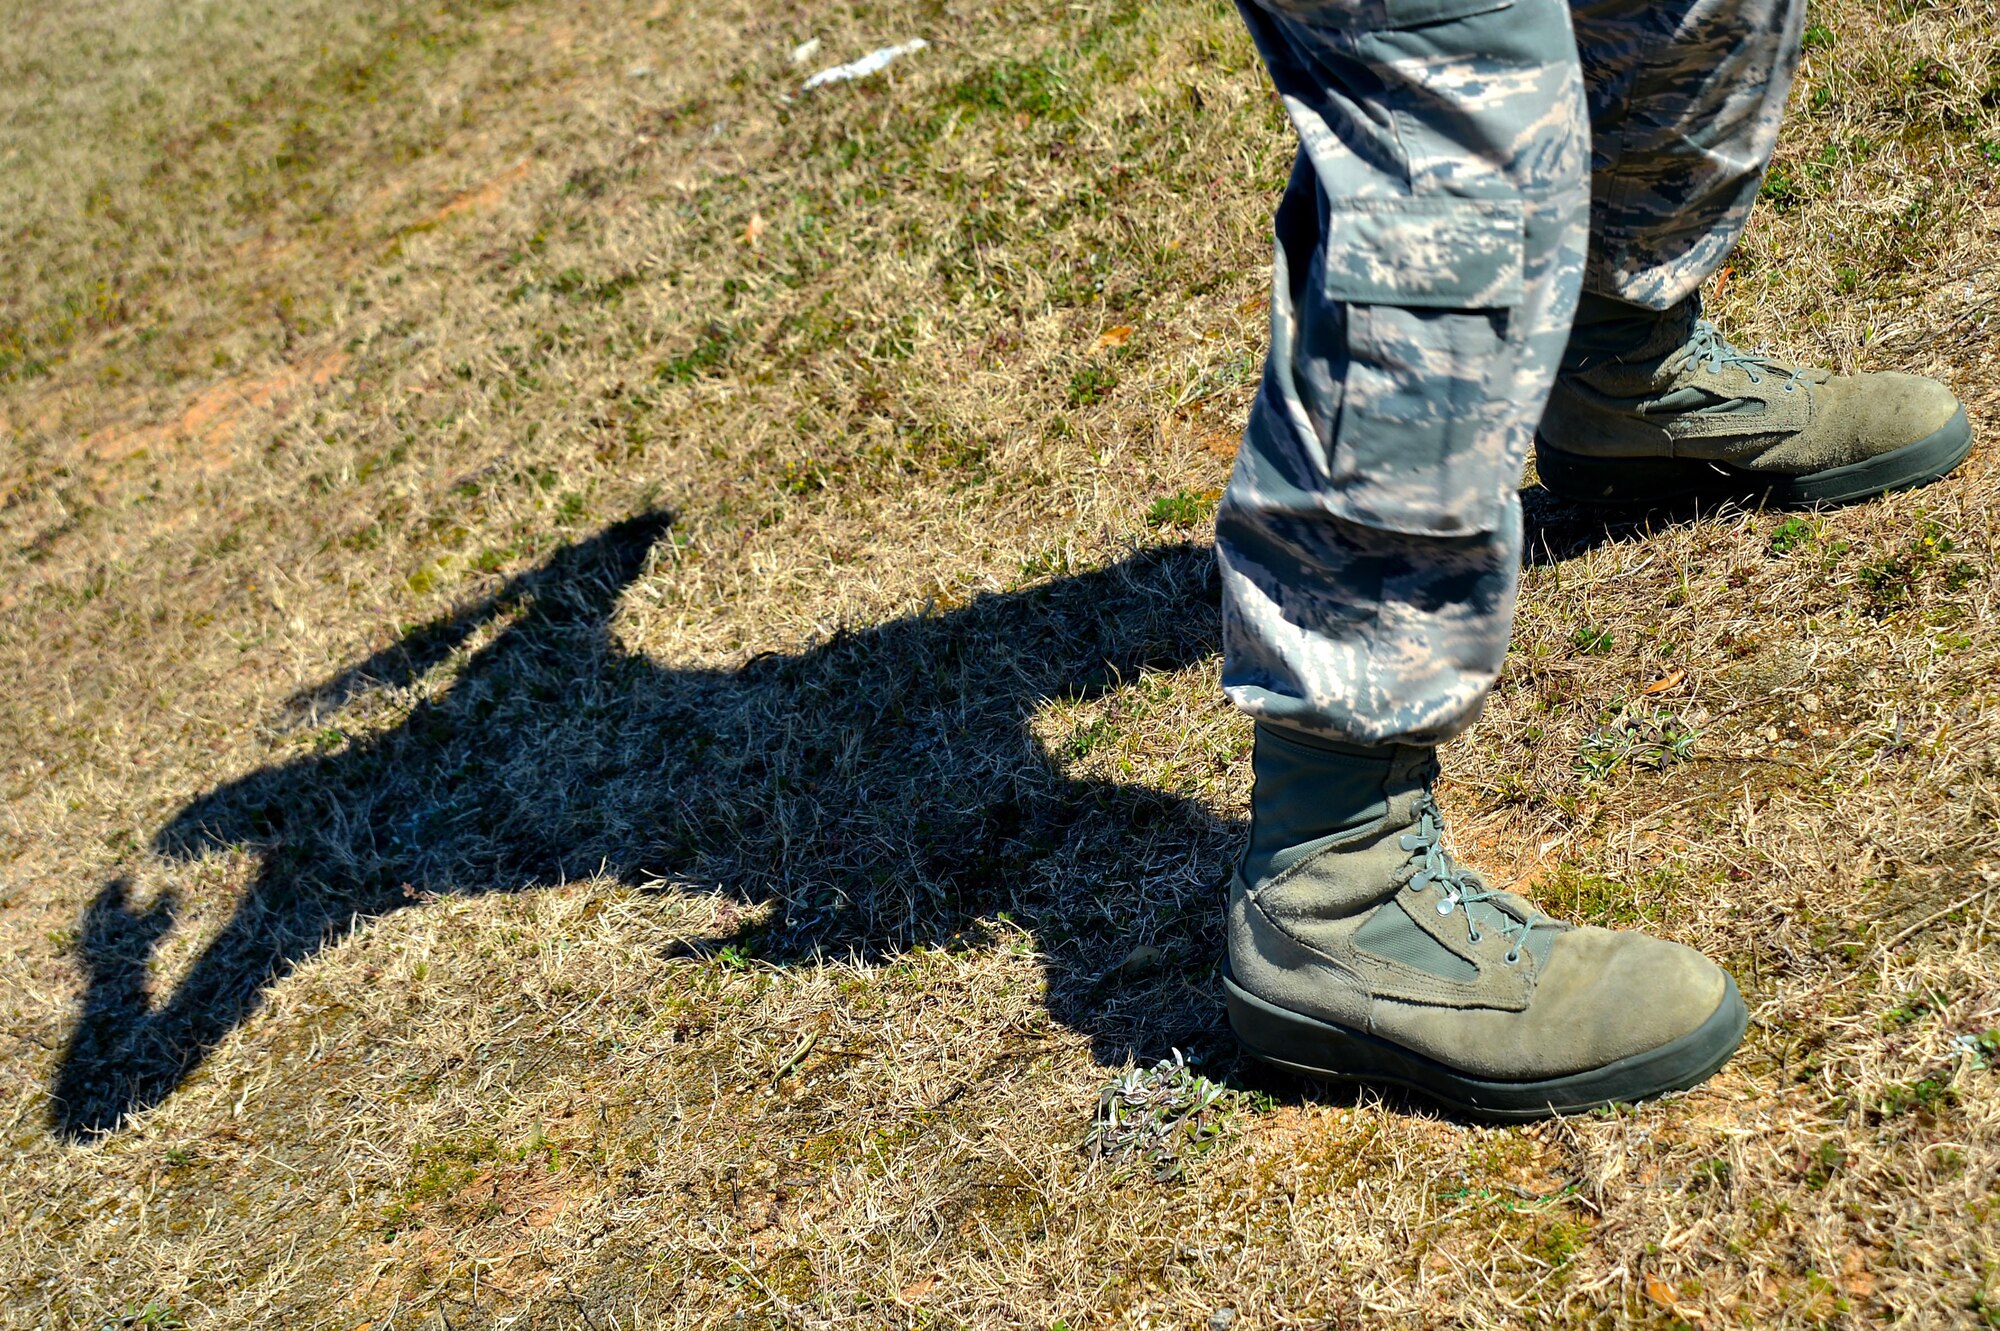 A U.S Air Force Airman assigned to the 20th Security Forces Squadron performs jumping jacks before being pepper sprayed at Shaw Air Force Base, S.C., Feb. 29, 2016. The active ingredient in pepper spray is capsaicin, which is a chemical derived from the fruit of plants in the Capsicum genus, including chilies. (U.S. Air Force photo by Senior Airman Michael Cossaboom)